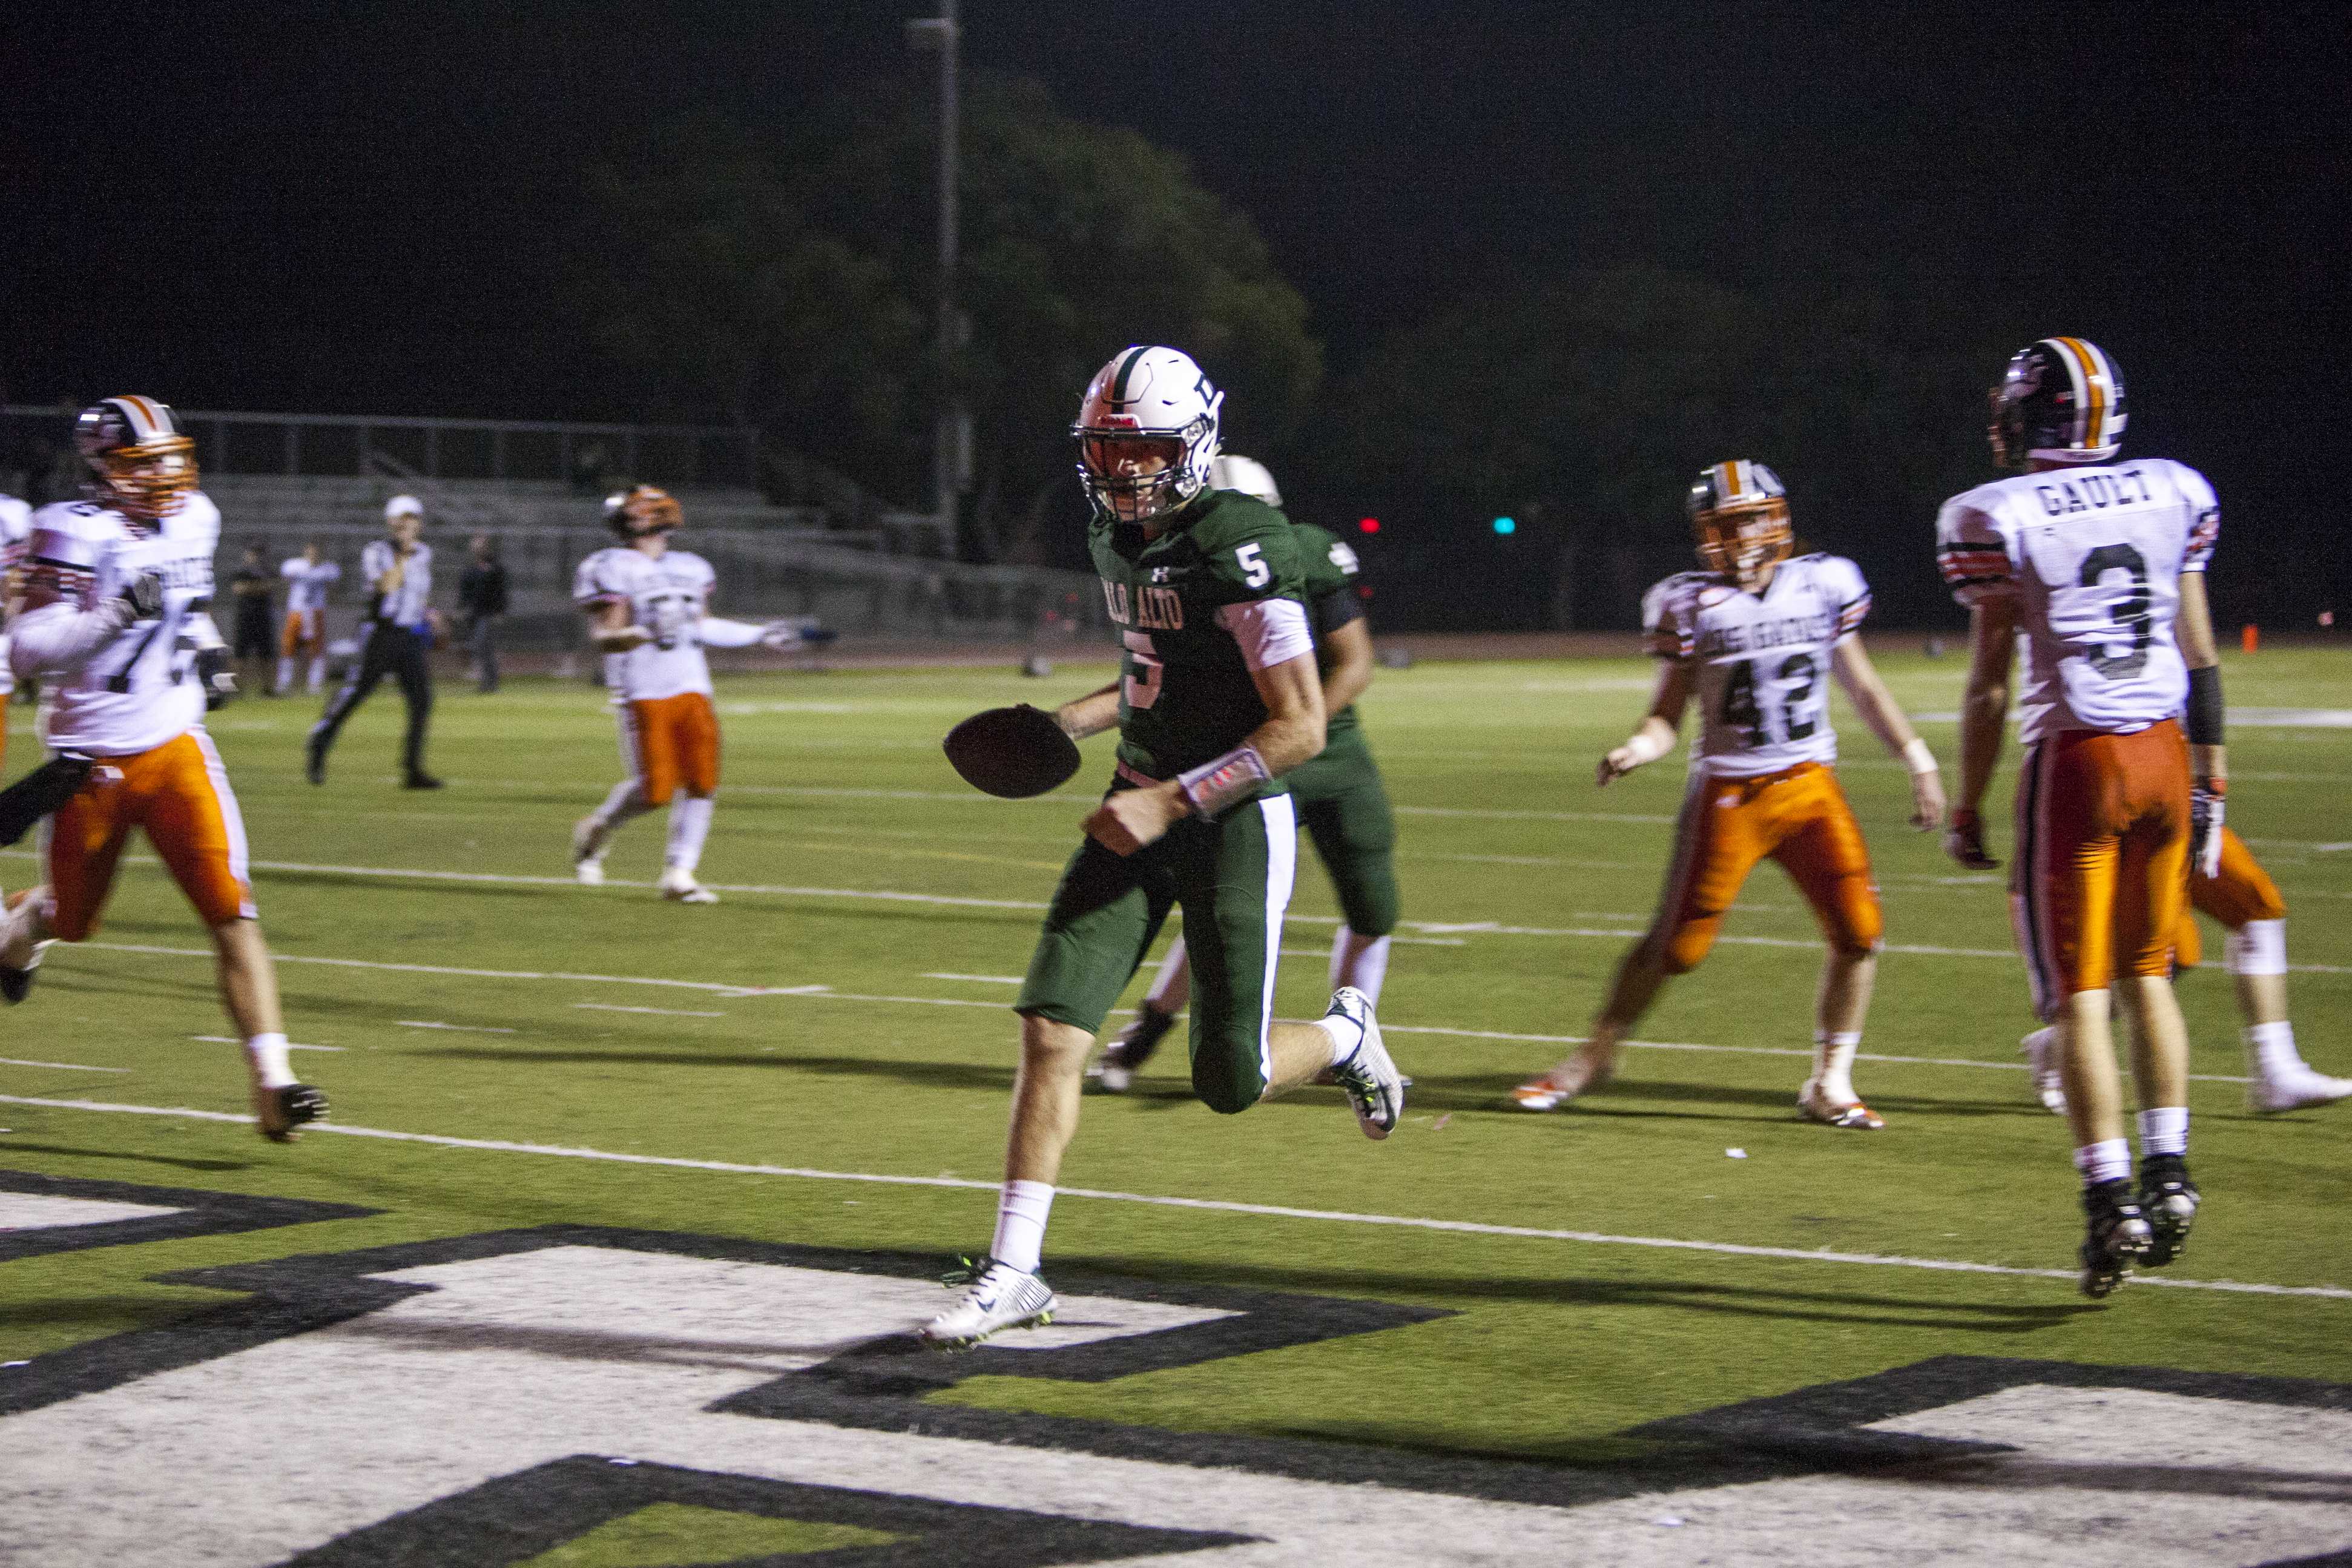 Senior quarterback Justin Hull runs the ball into the end zone for a touchdown. The Vikings' fell to the Los Gatos Wildcats on Friday night at Viking Stadium, a devastating loss for Paly's homecoming game.